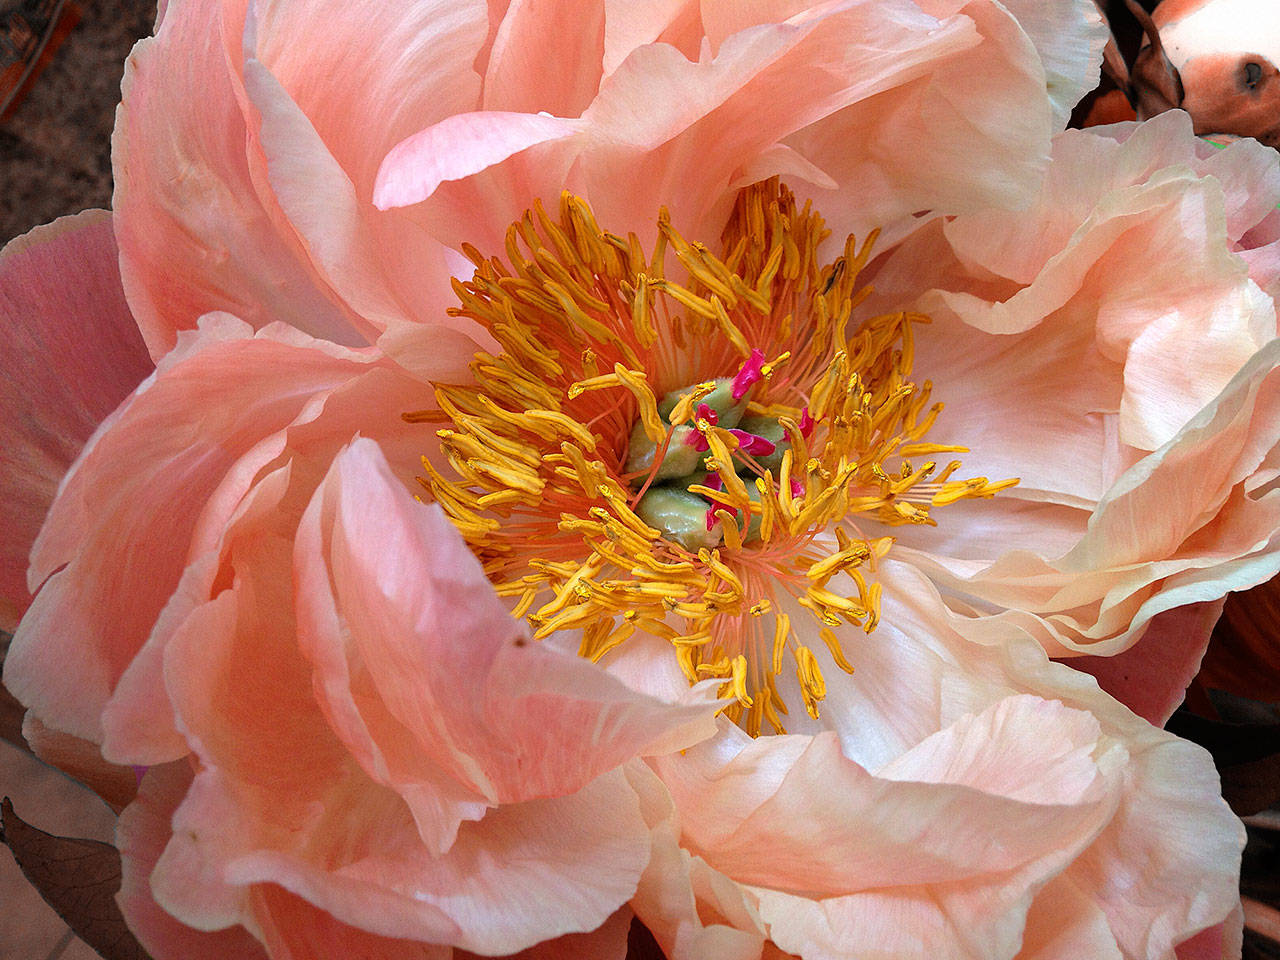 Learn about peony varieties at garden society work party